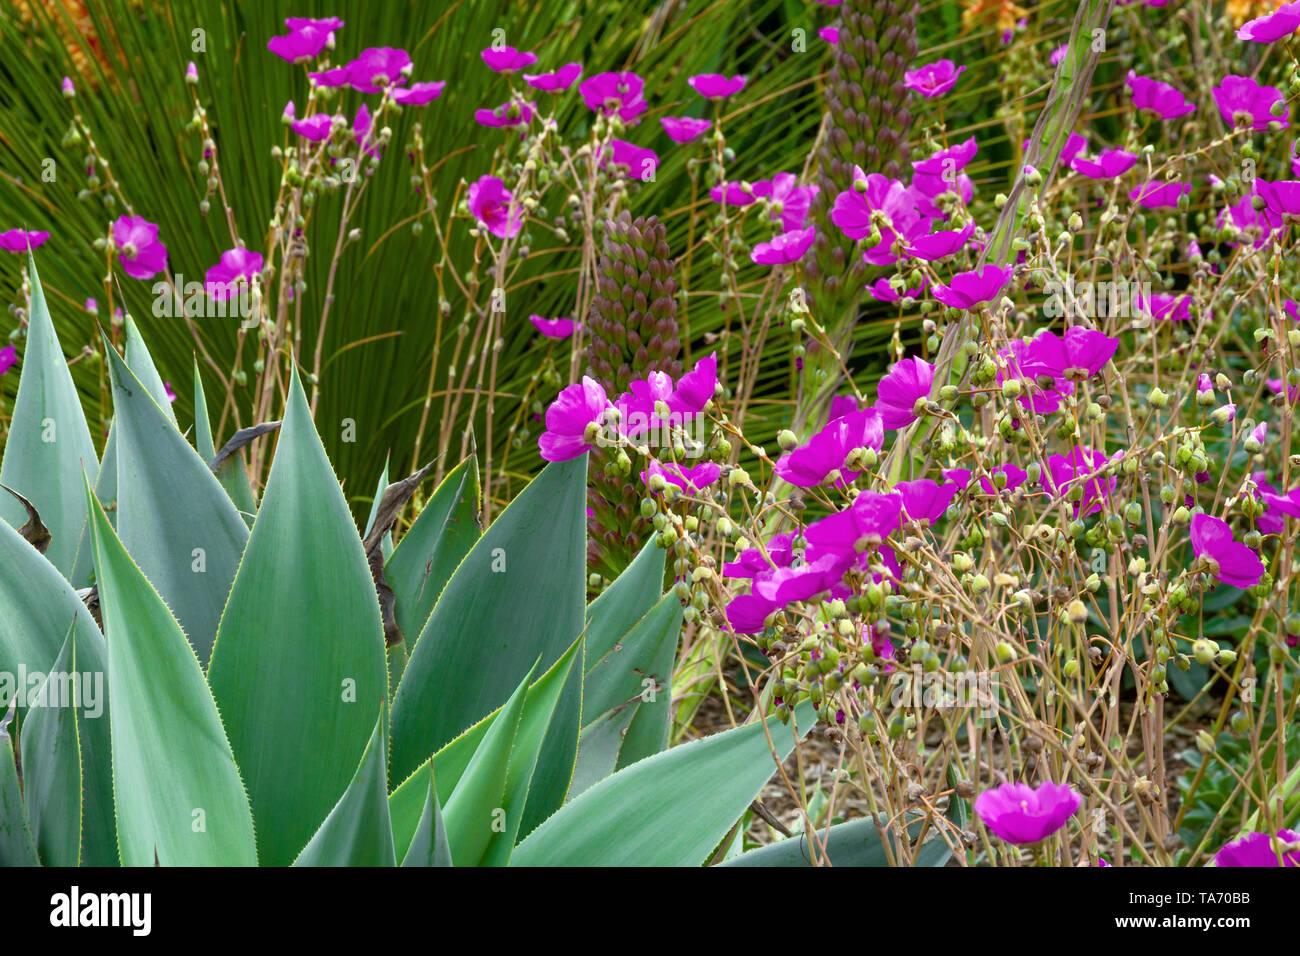 Agave garden with purple flowers Stock Photo